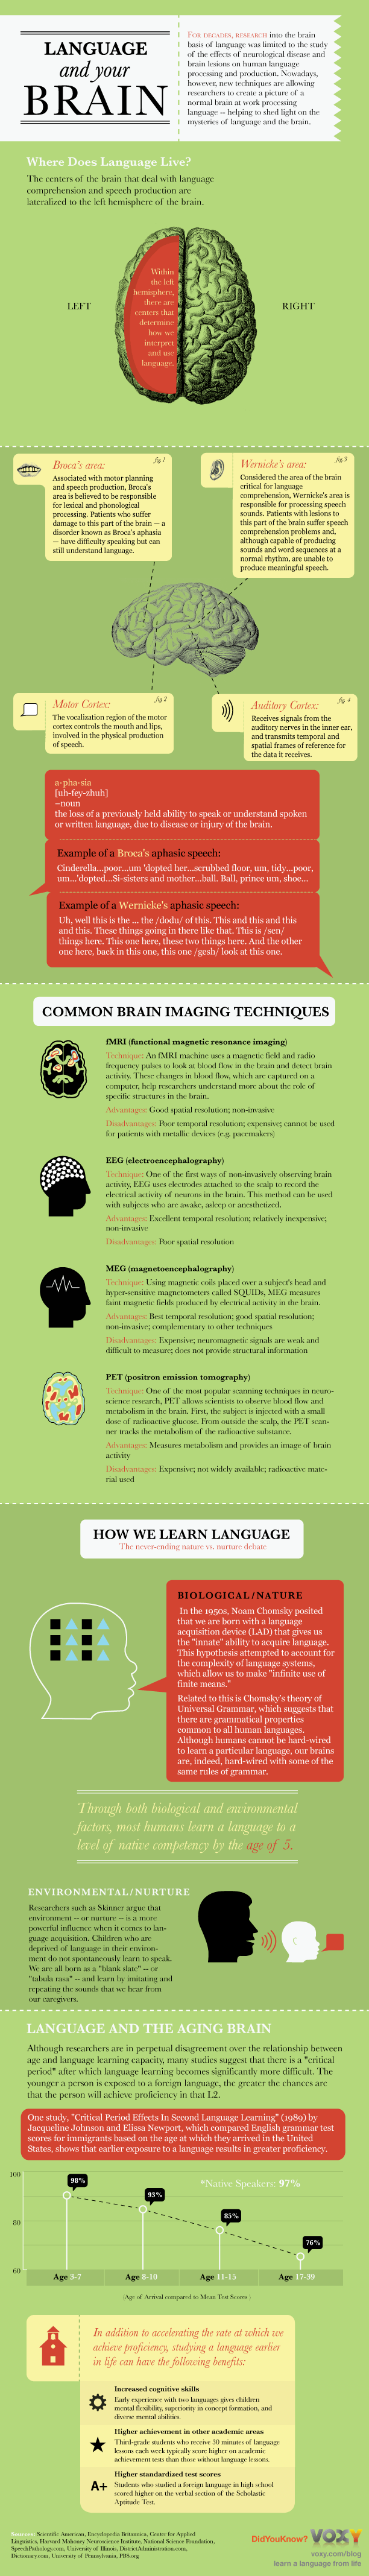 Language and the Brain Infographic